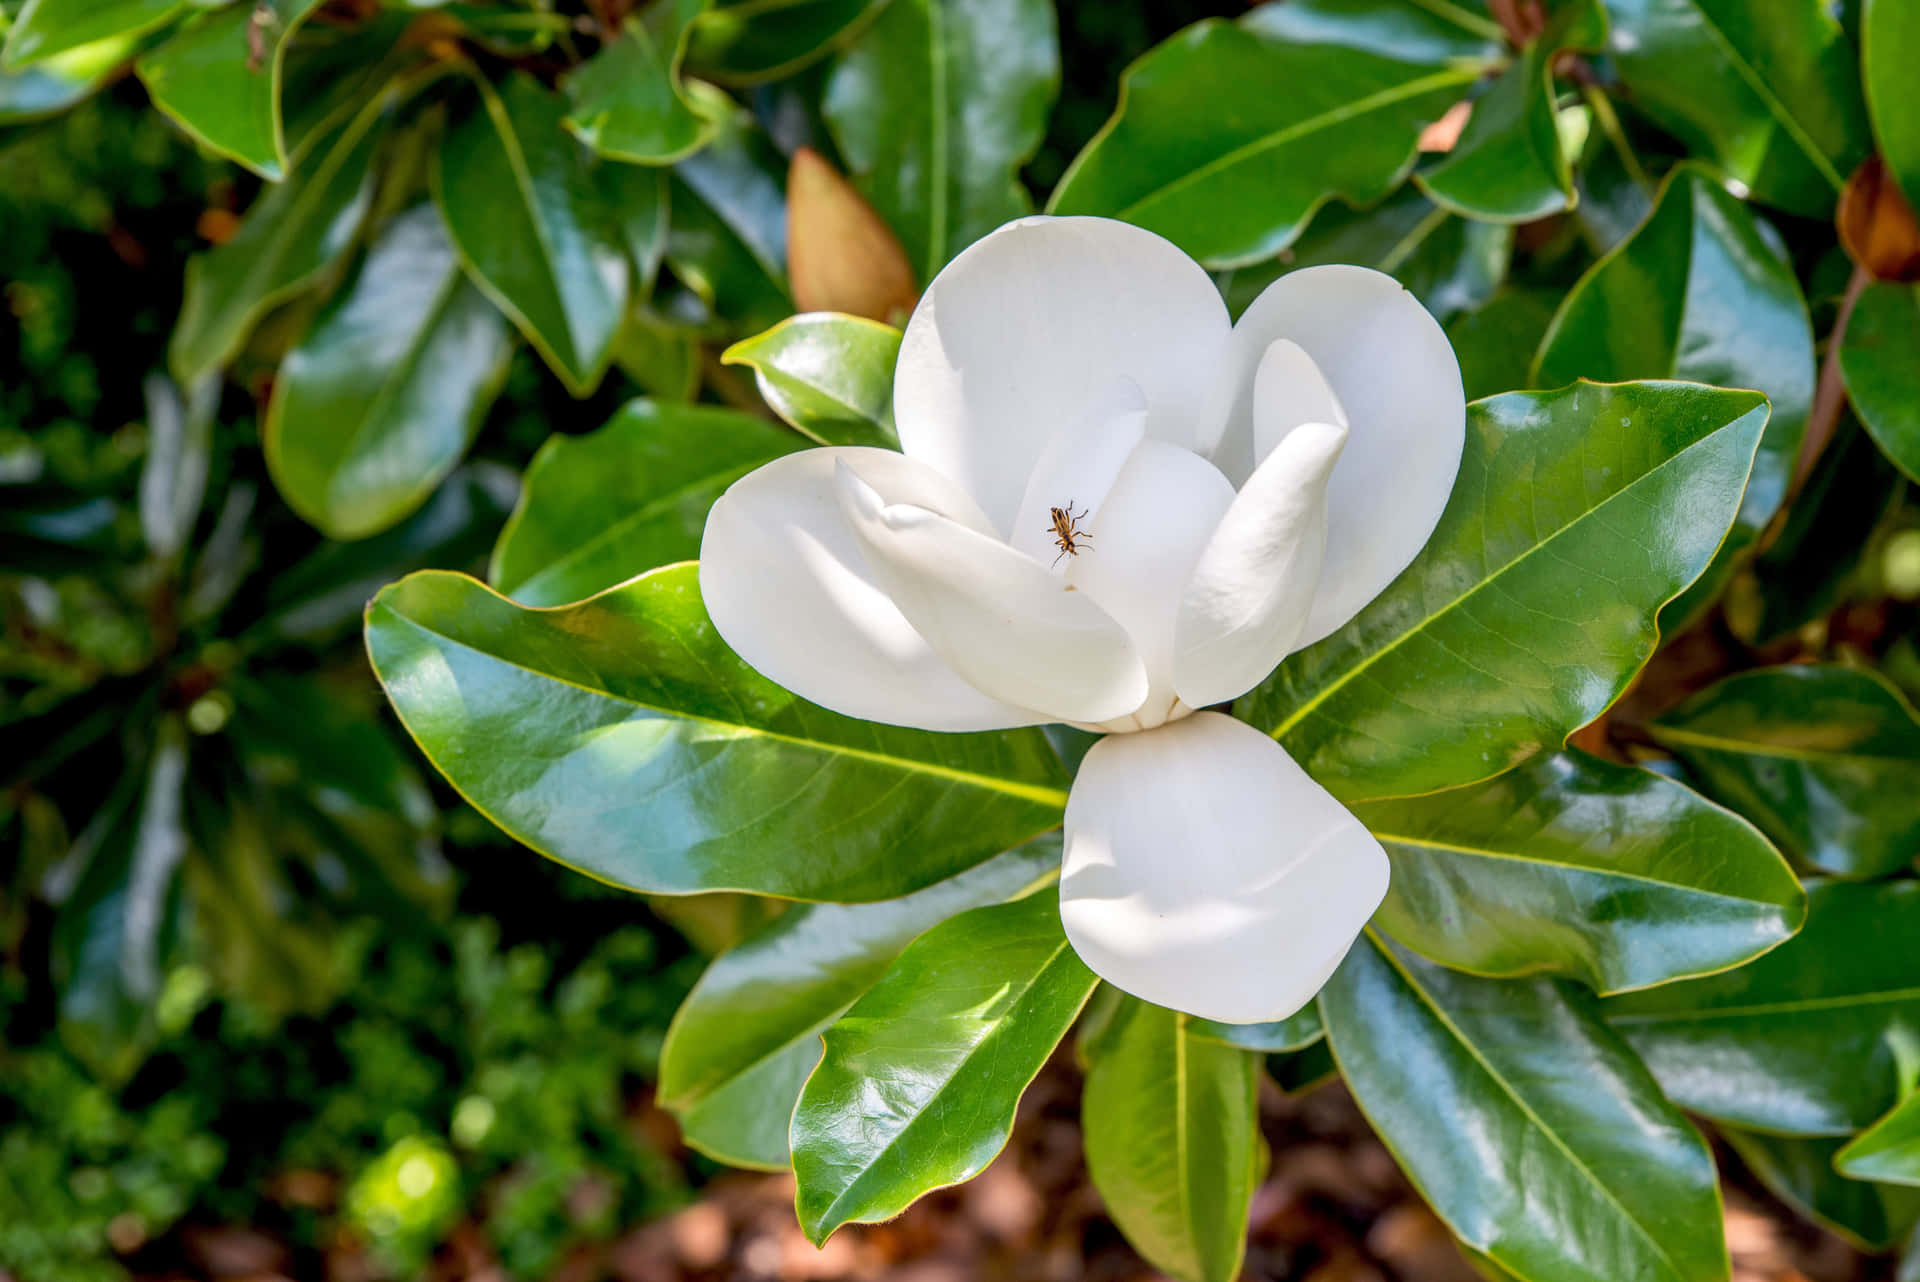 A White Flower Is Growing On A Bush